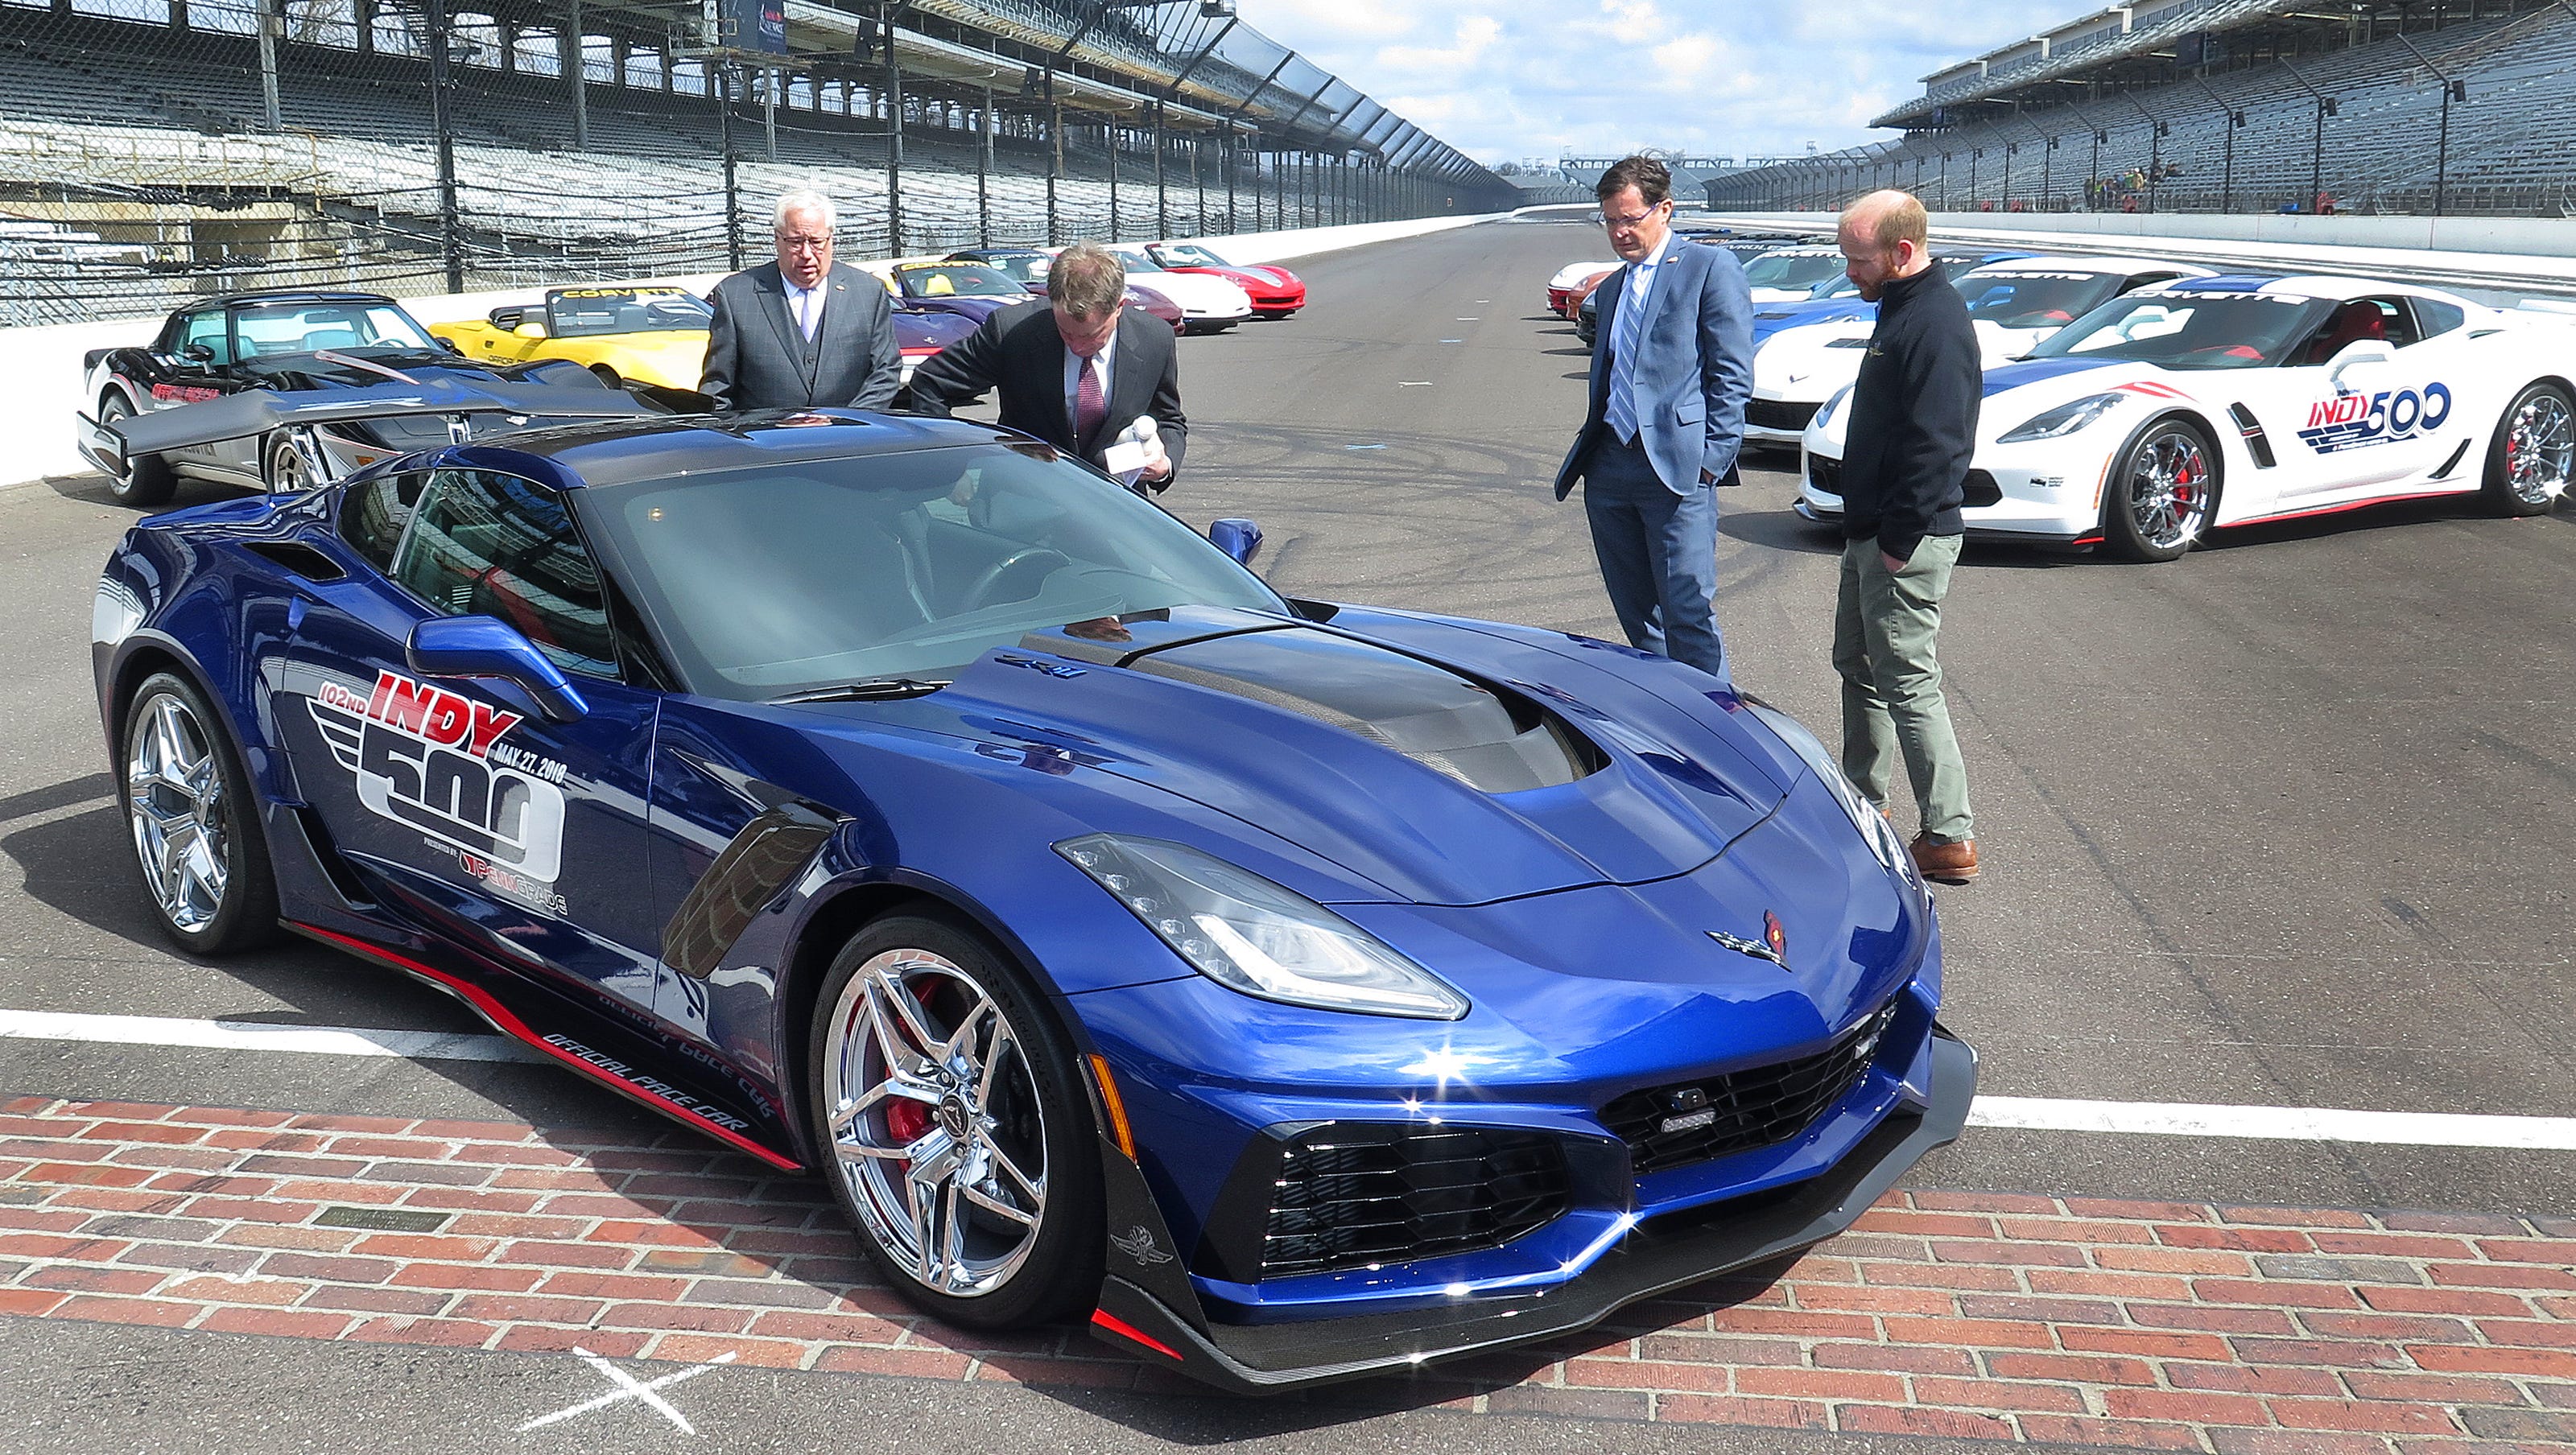 2018 Indy 500 pace car unveiled